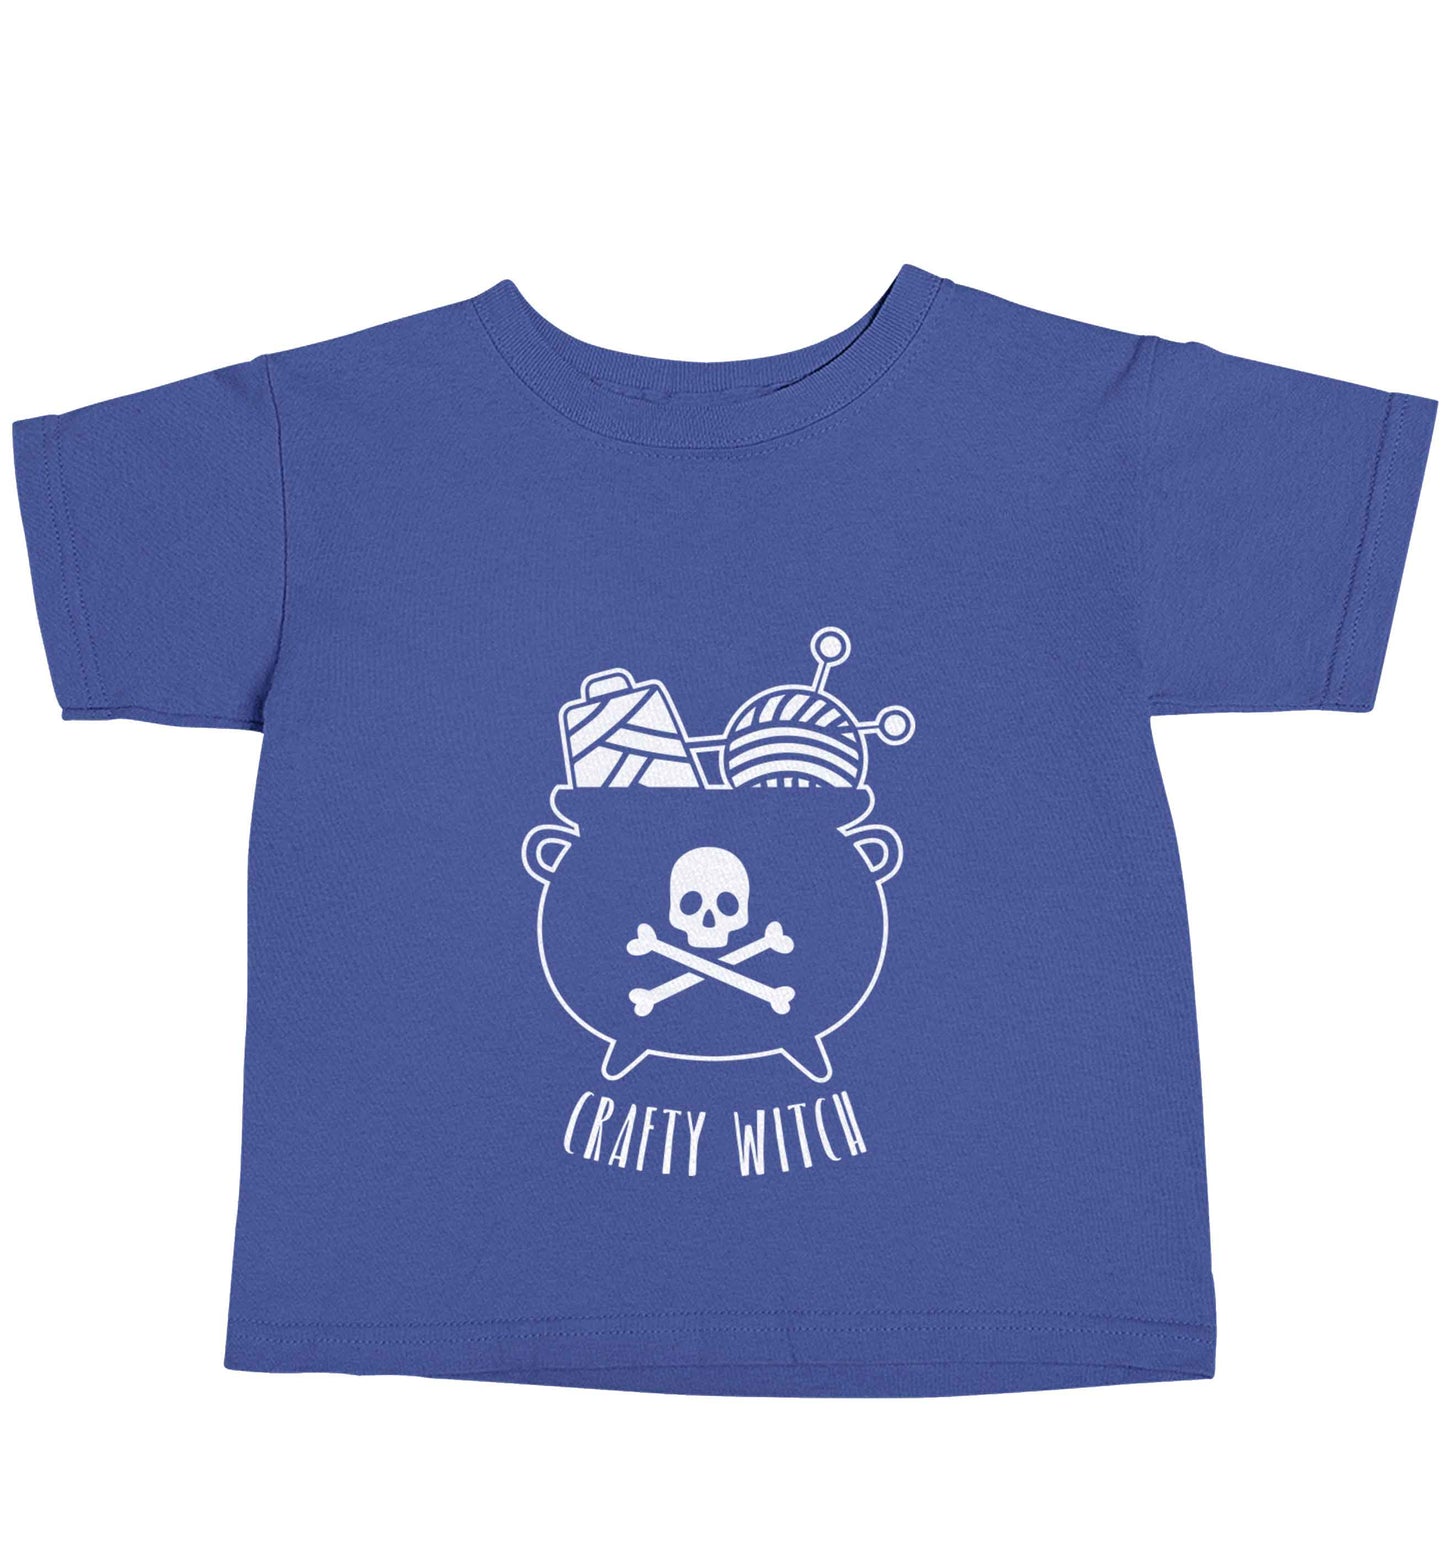 Crafty witch blue baby toddler Tshirt 2 Years